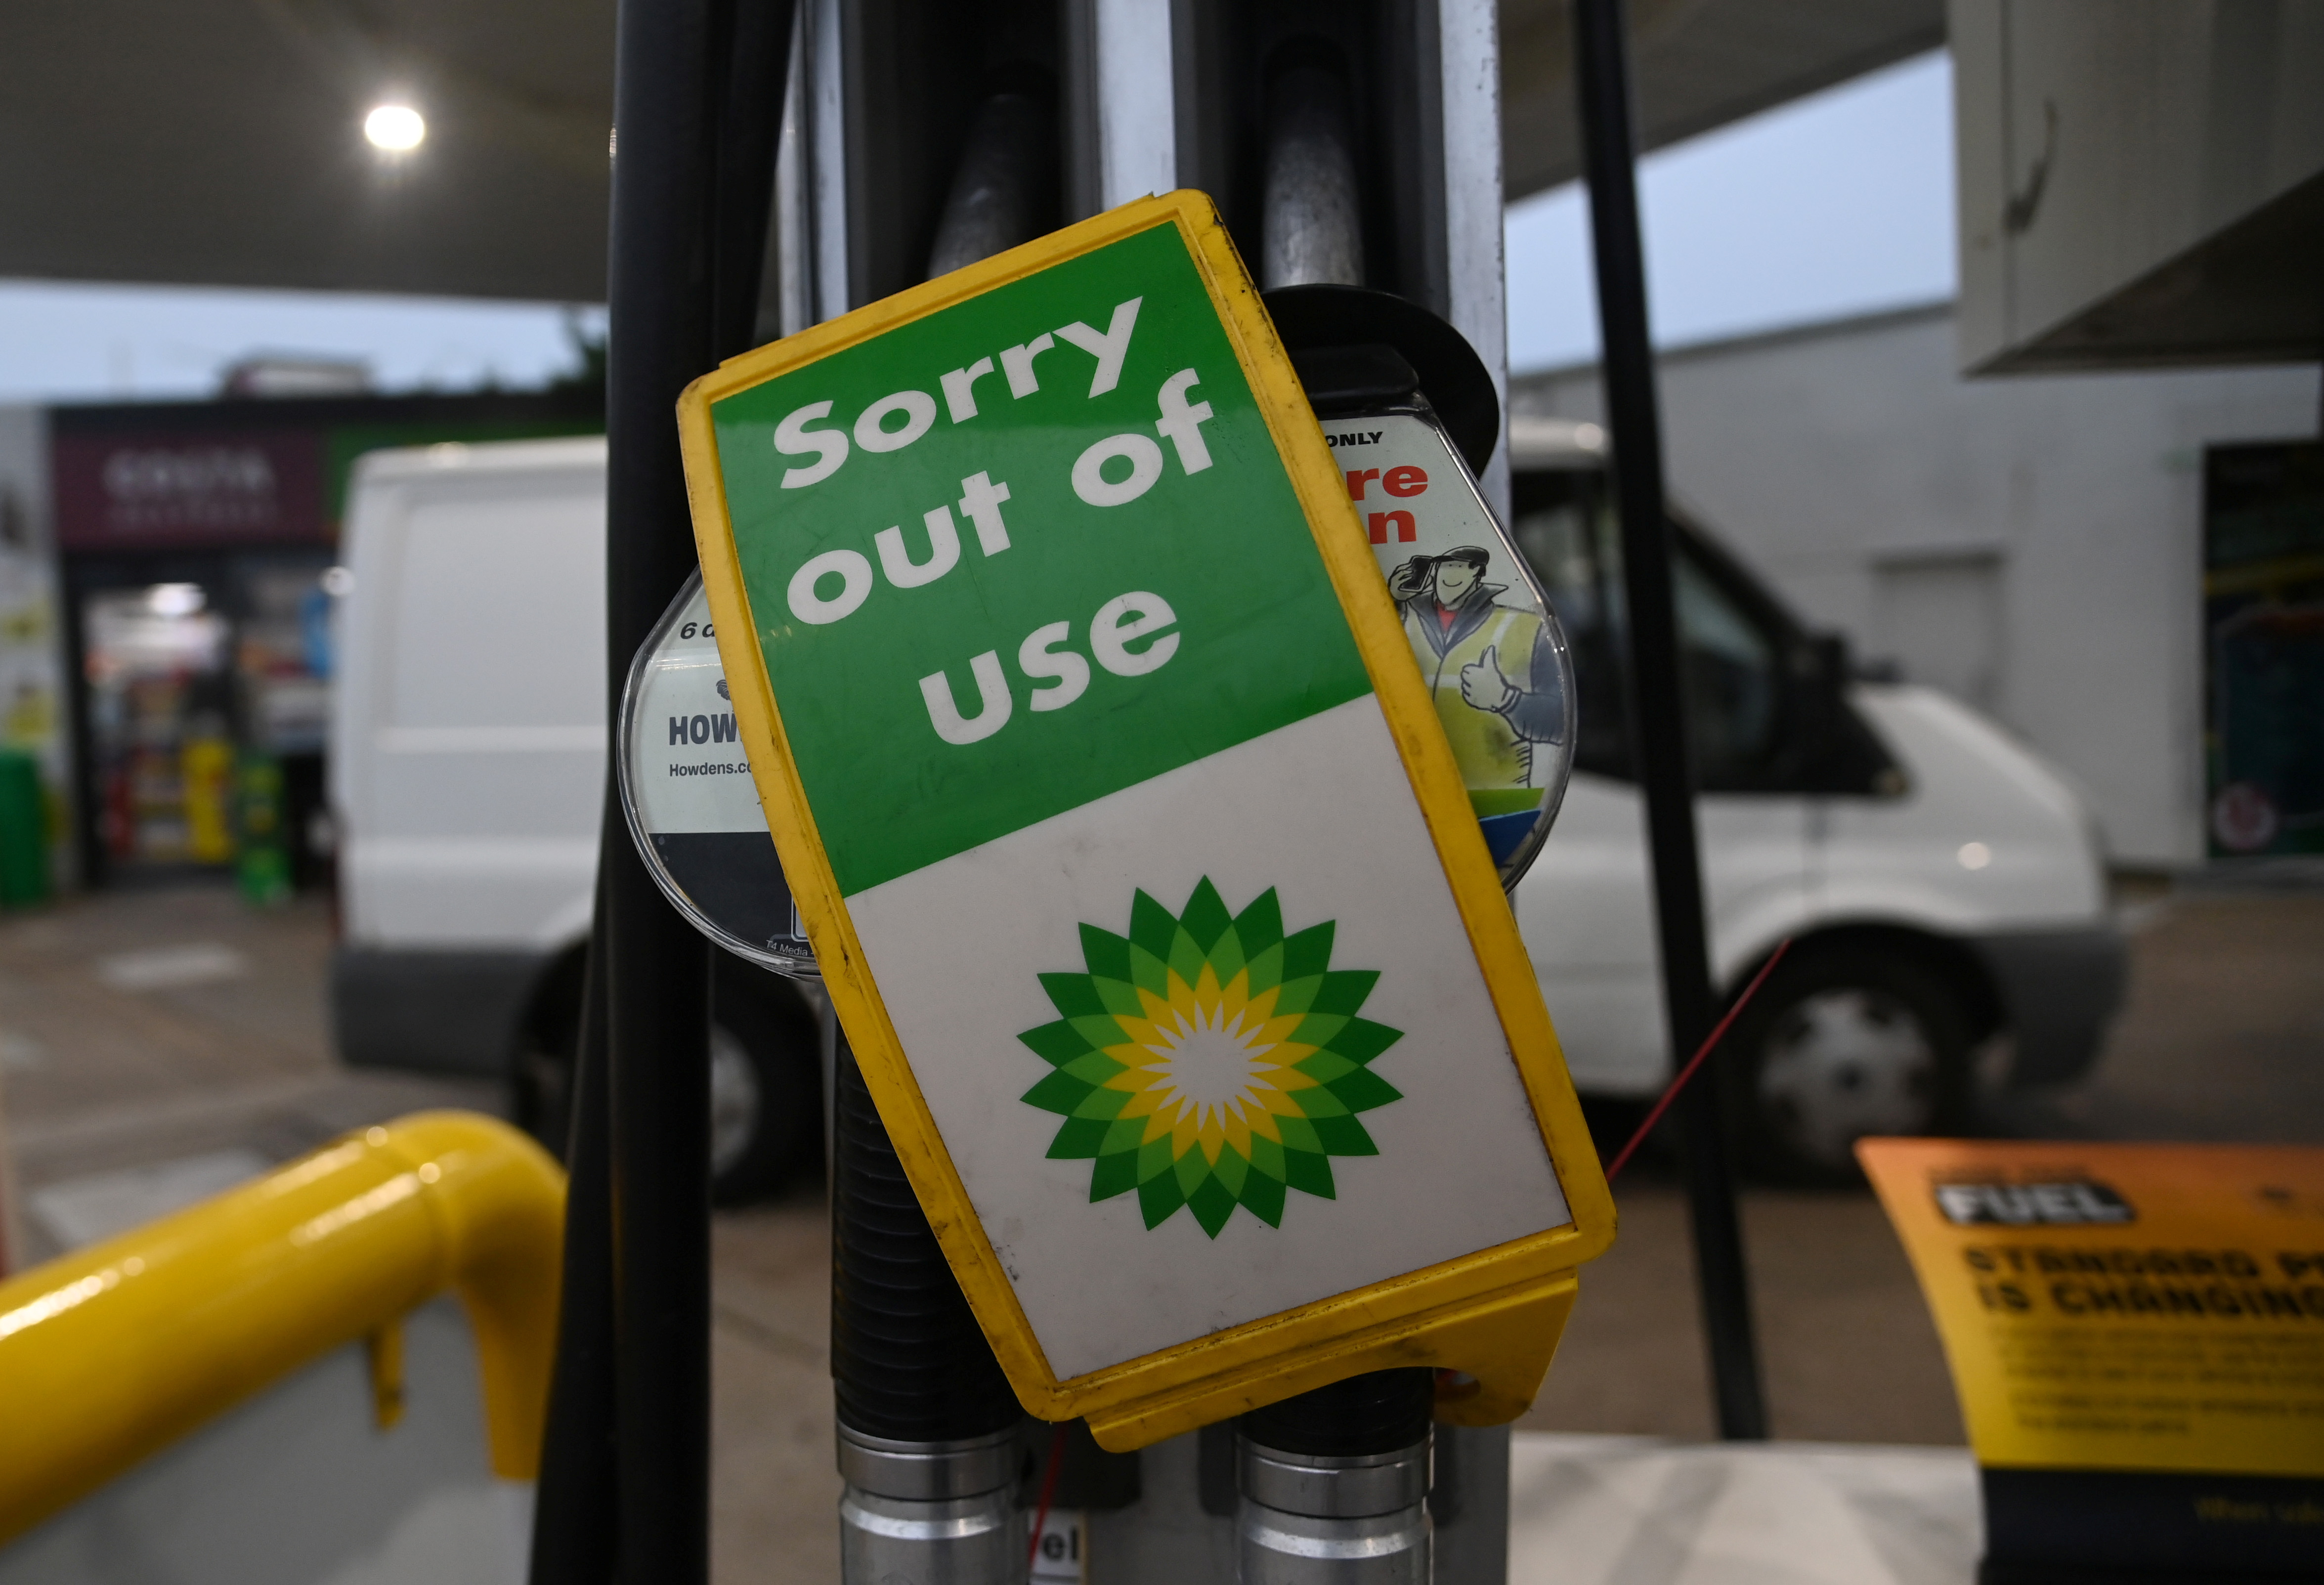 Out of use signs are placed over pumps at a Shell petrol station in London